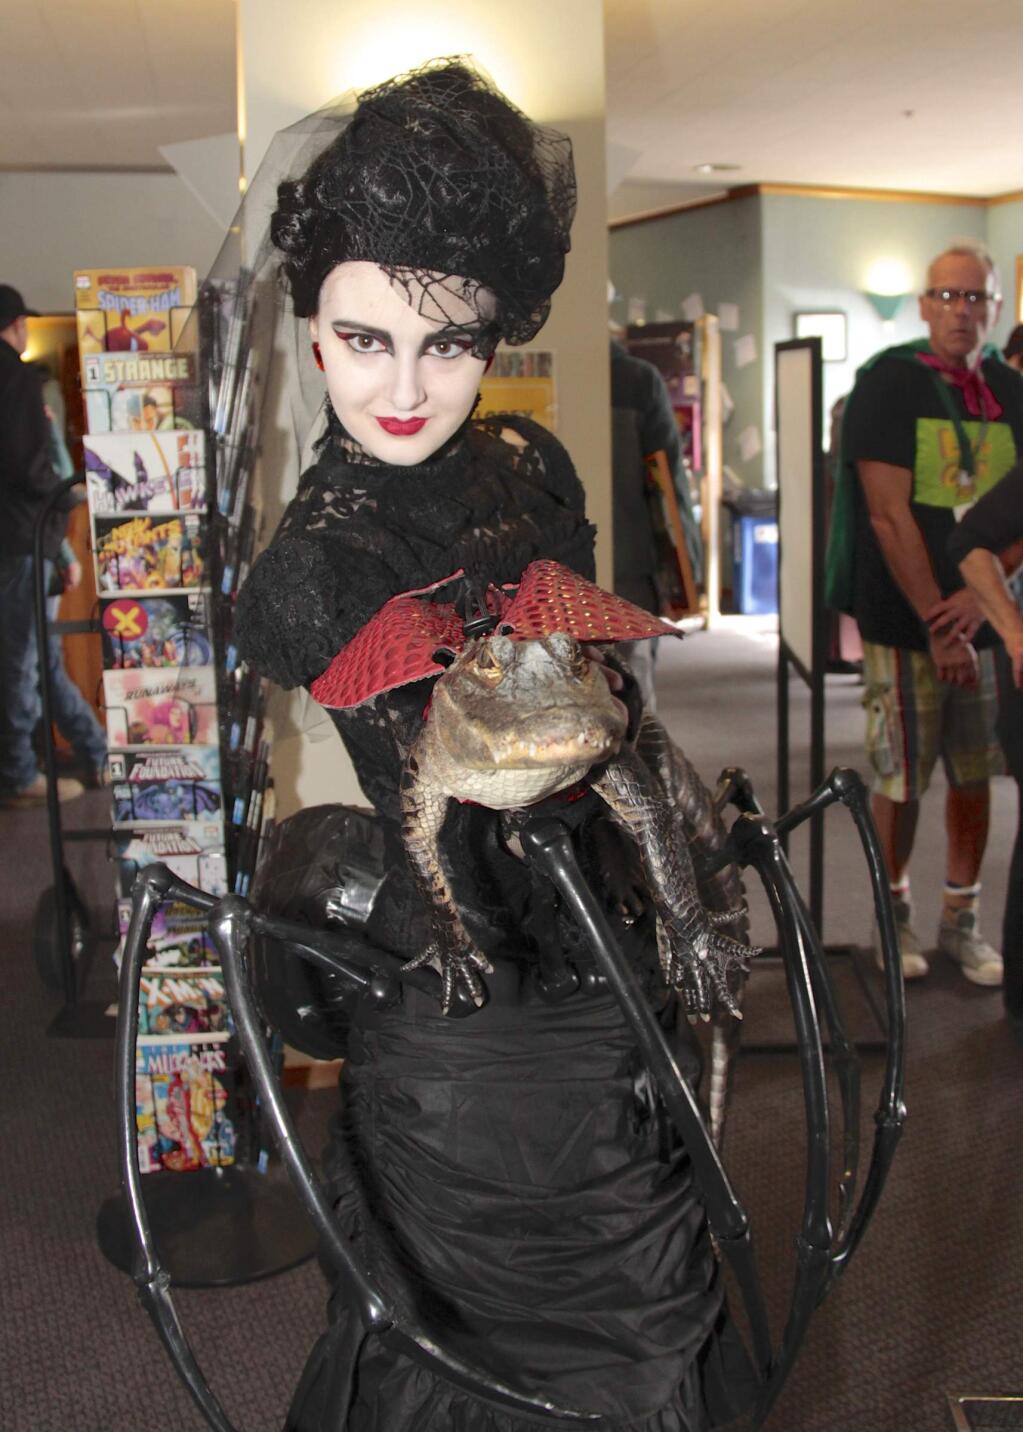 Gwendolyn Phair holding Classroom Safairi's alligator Darth Vador at the LumaCon held at the Lucchesi Center in Petaluma, California, on Saturday, January 25, 2020. JIM JOHNSON for the ARGUS COURIER.